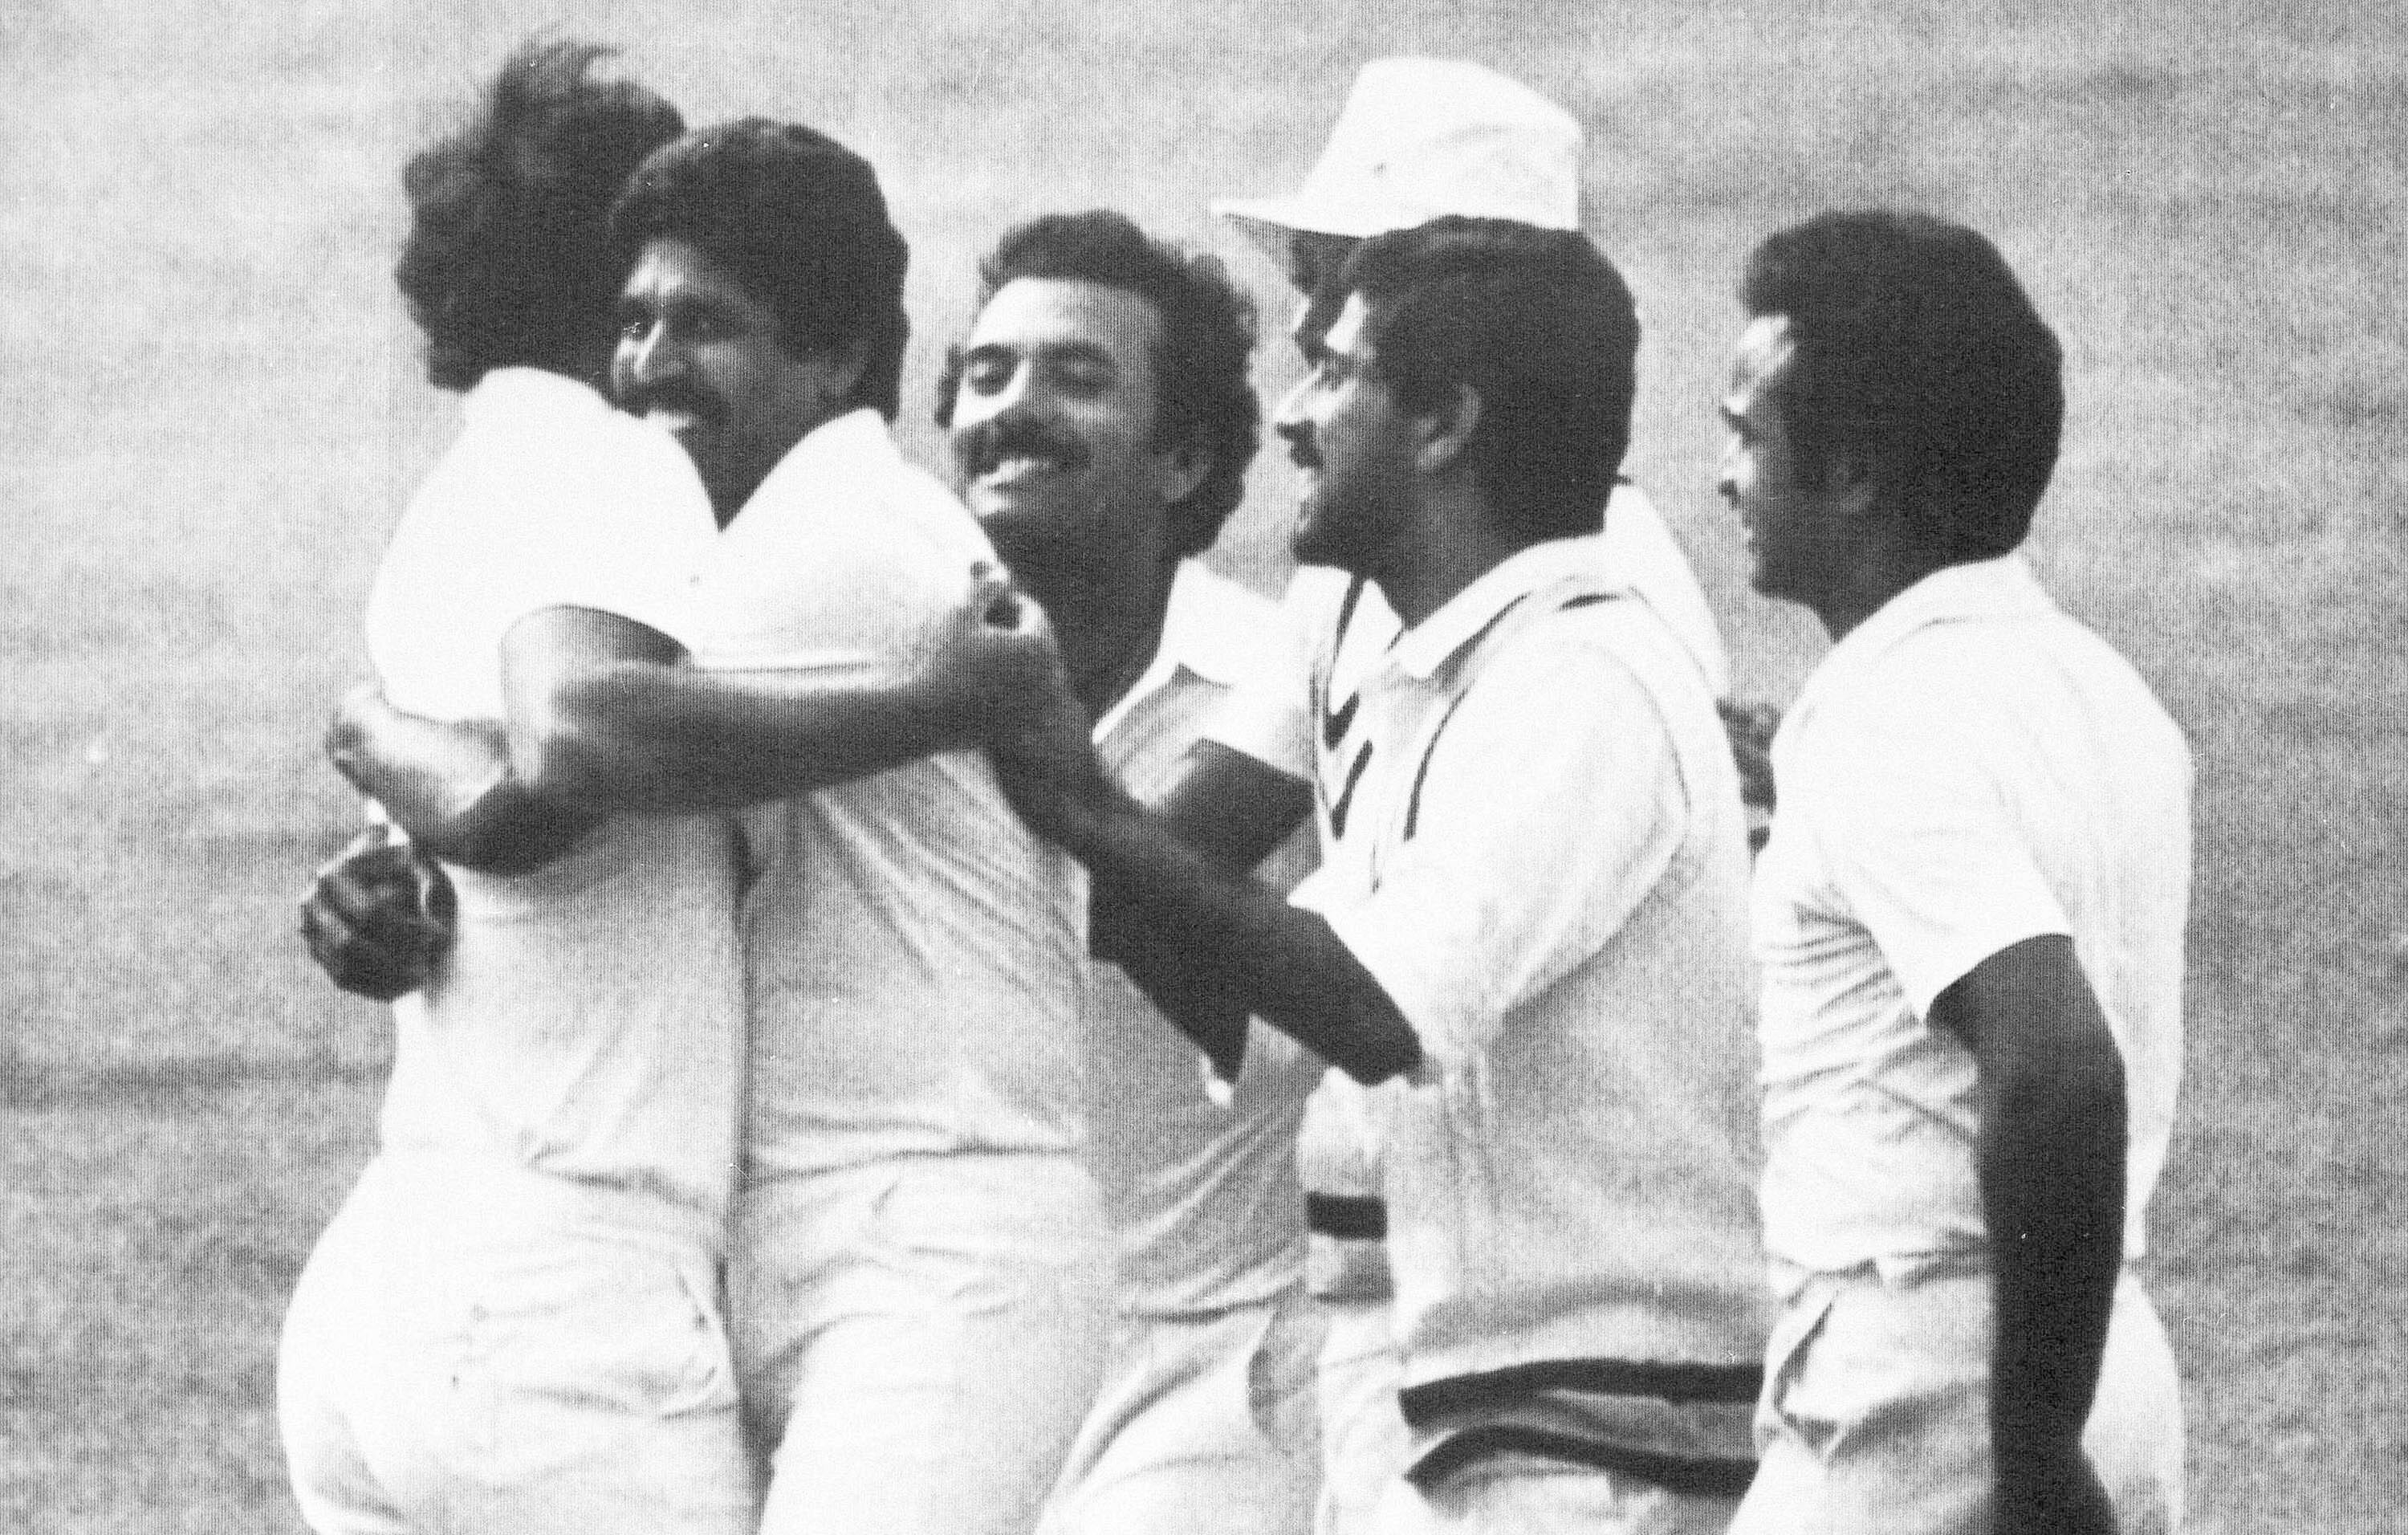 Indian cricket team captain Kapil Dev, second from left, hugs Indian bowler Madan Lal while the rest of the Indian team celebrate at Lord's after Gavaskar had caught West Indian, Larry Gomes, for five of the bowling of Madan Lal during the Prudential World Cup Final in London, 25 June 1983. India won the World Cup for the first time in 1983